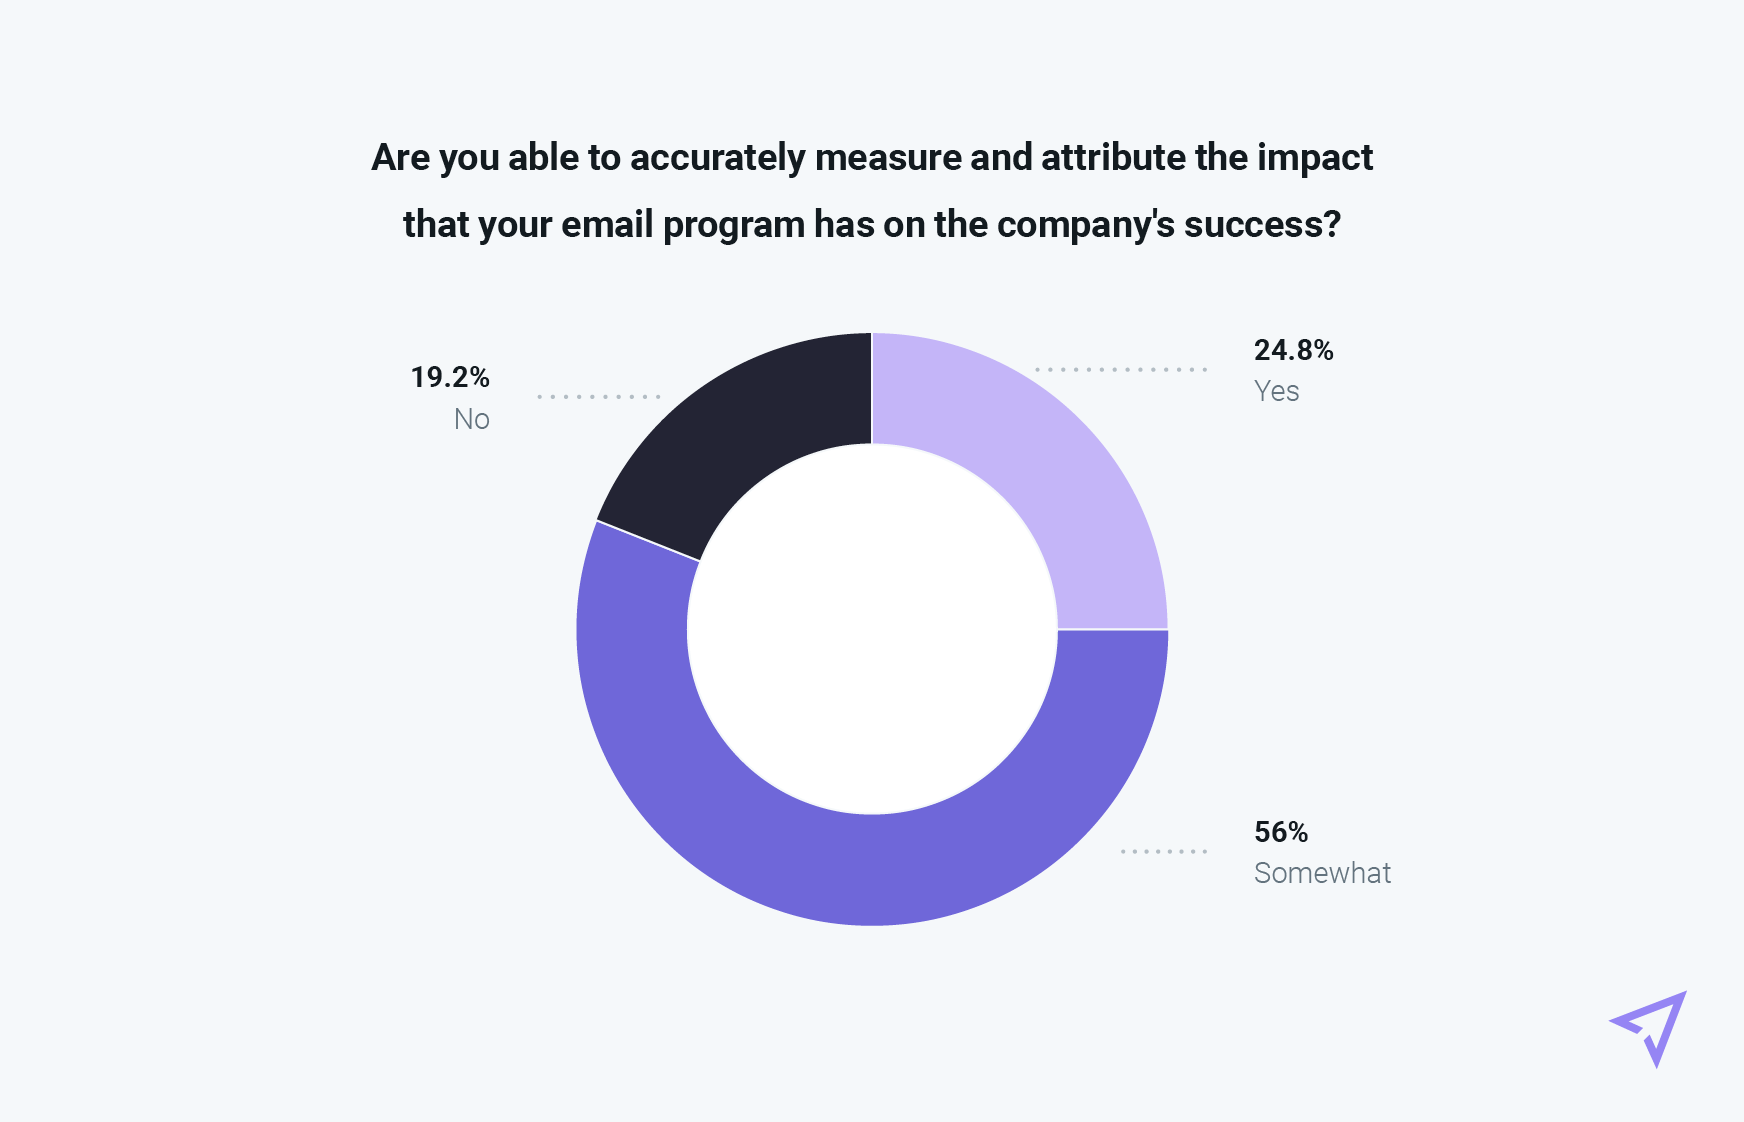 Chart showing how confident senders feel about accurately measuring email success